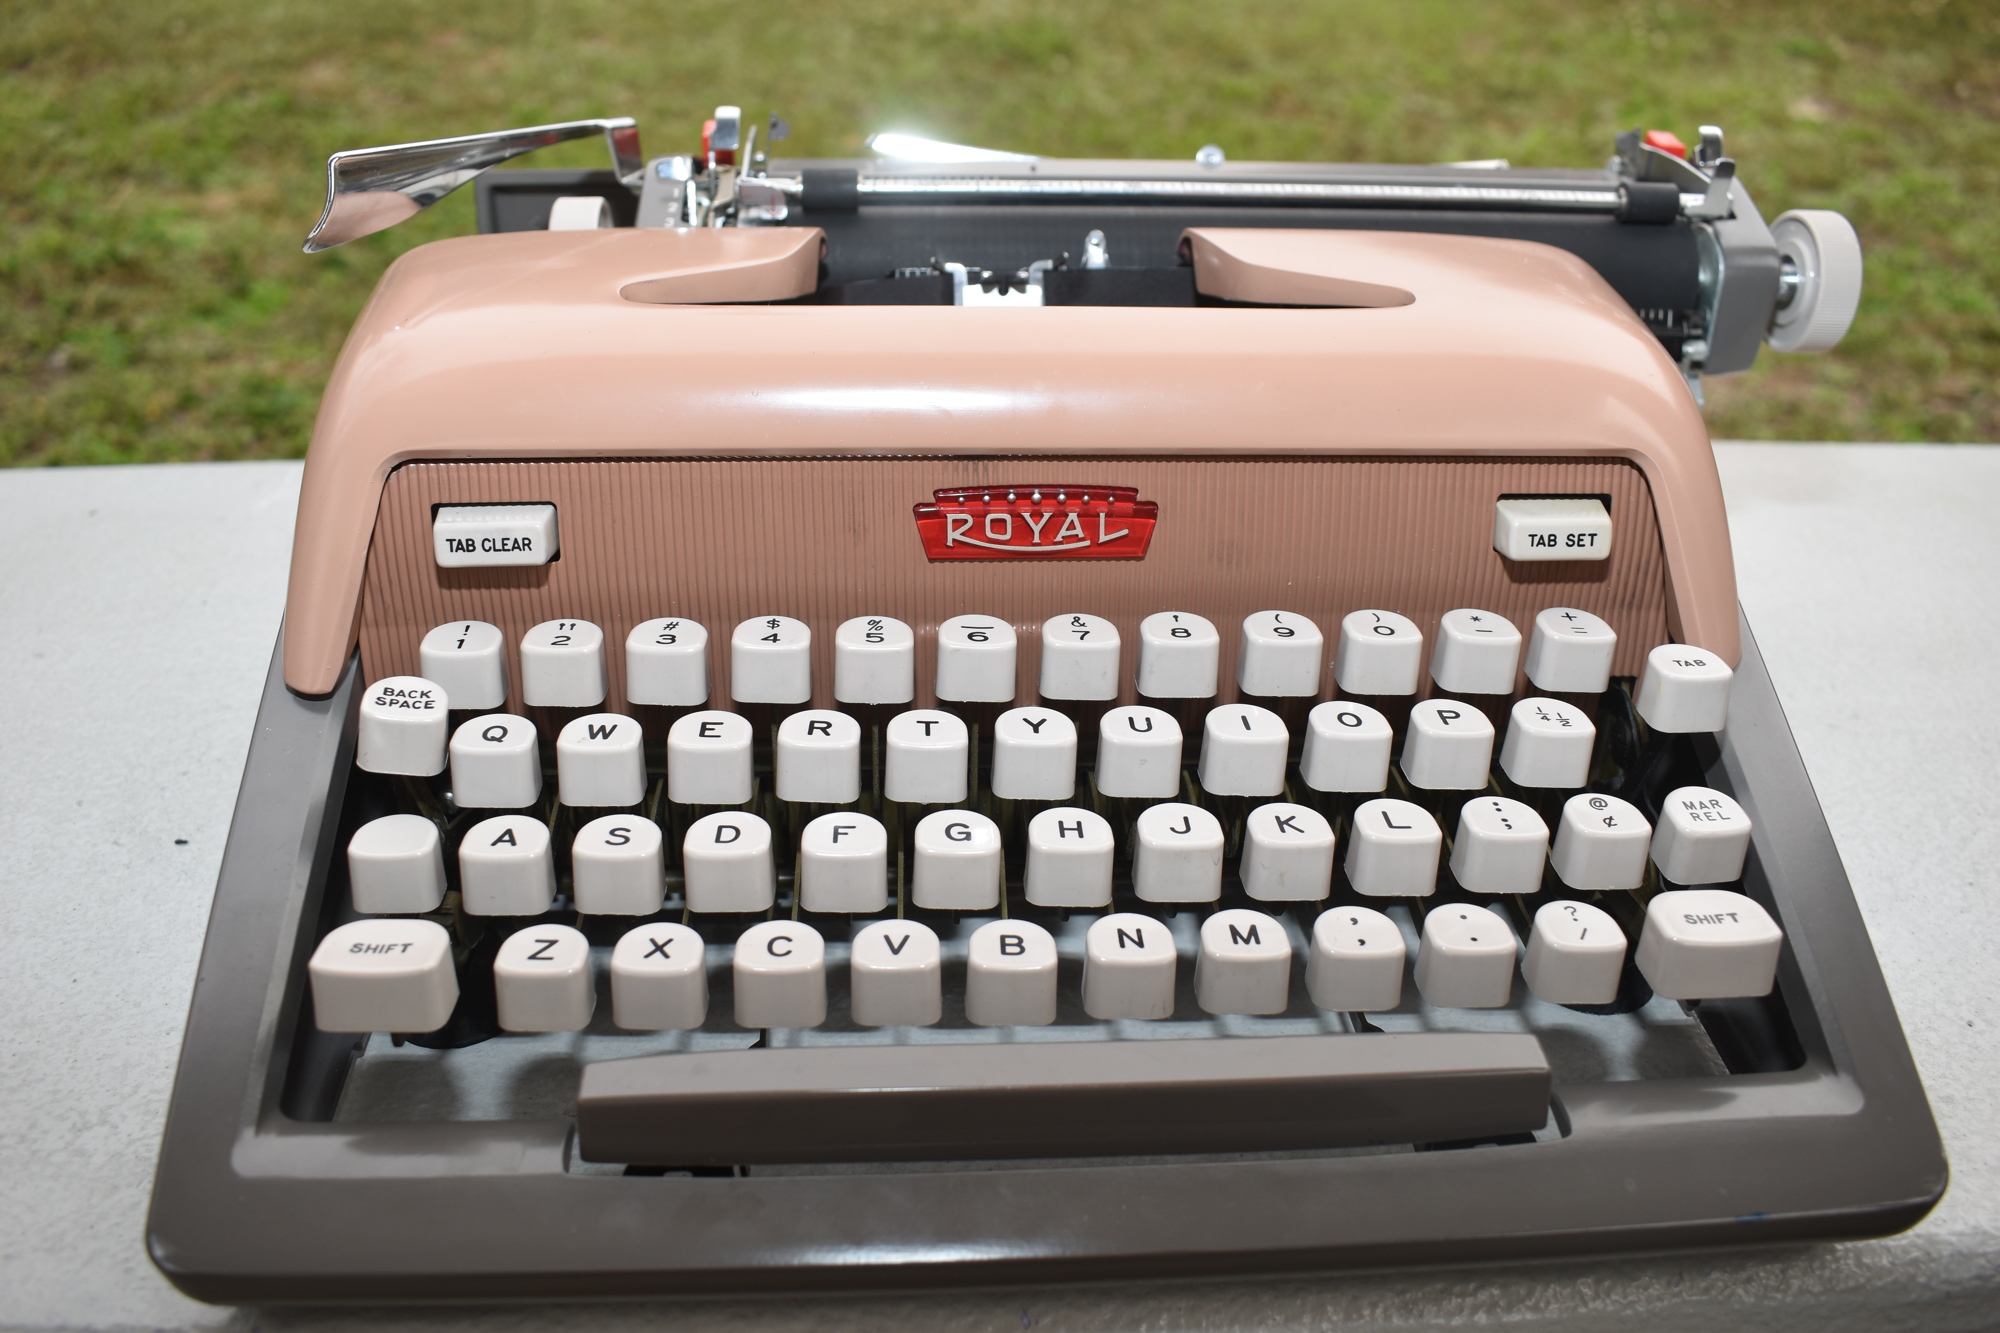 Joanna Fox has amassed a collection of typewriters from Goodwill.